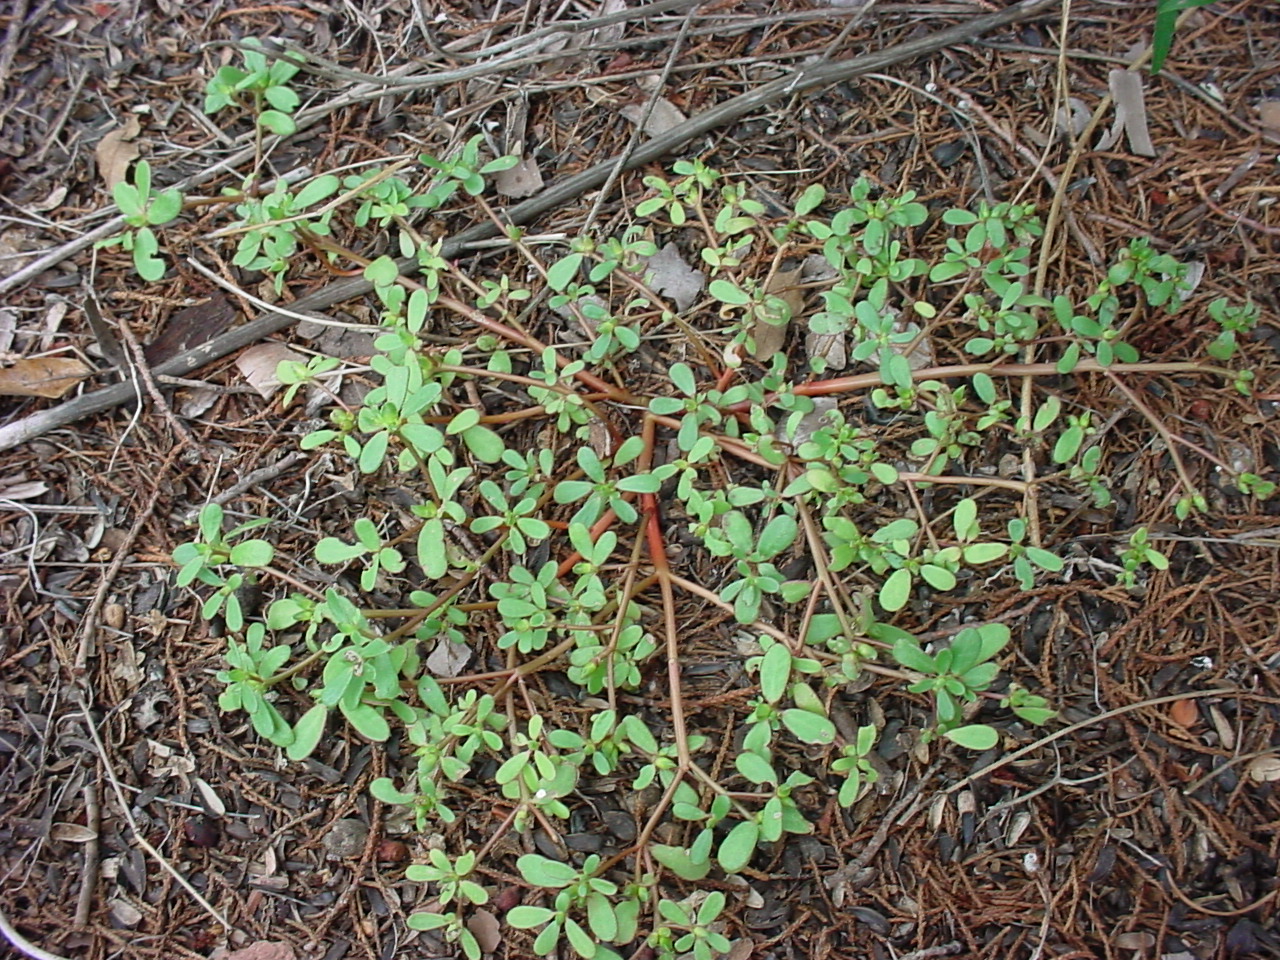 Wider view of growth habit, showing spreading, red stems.